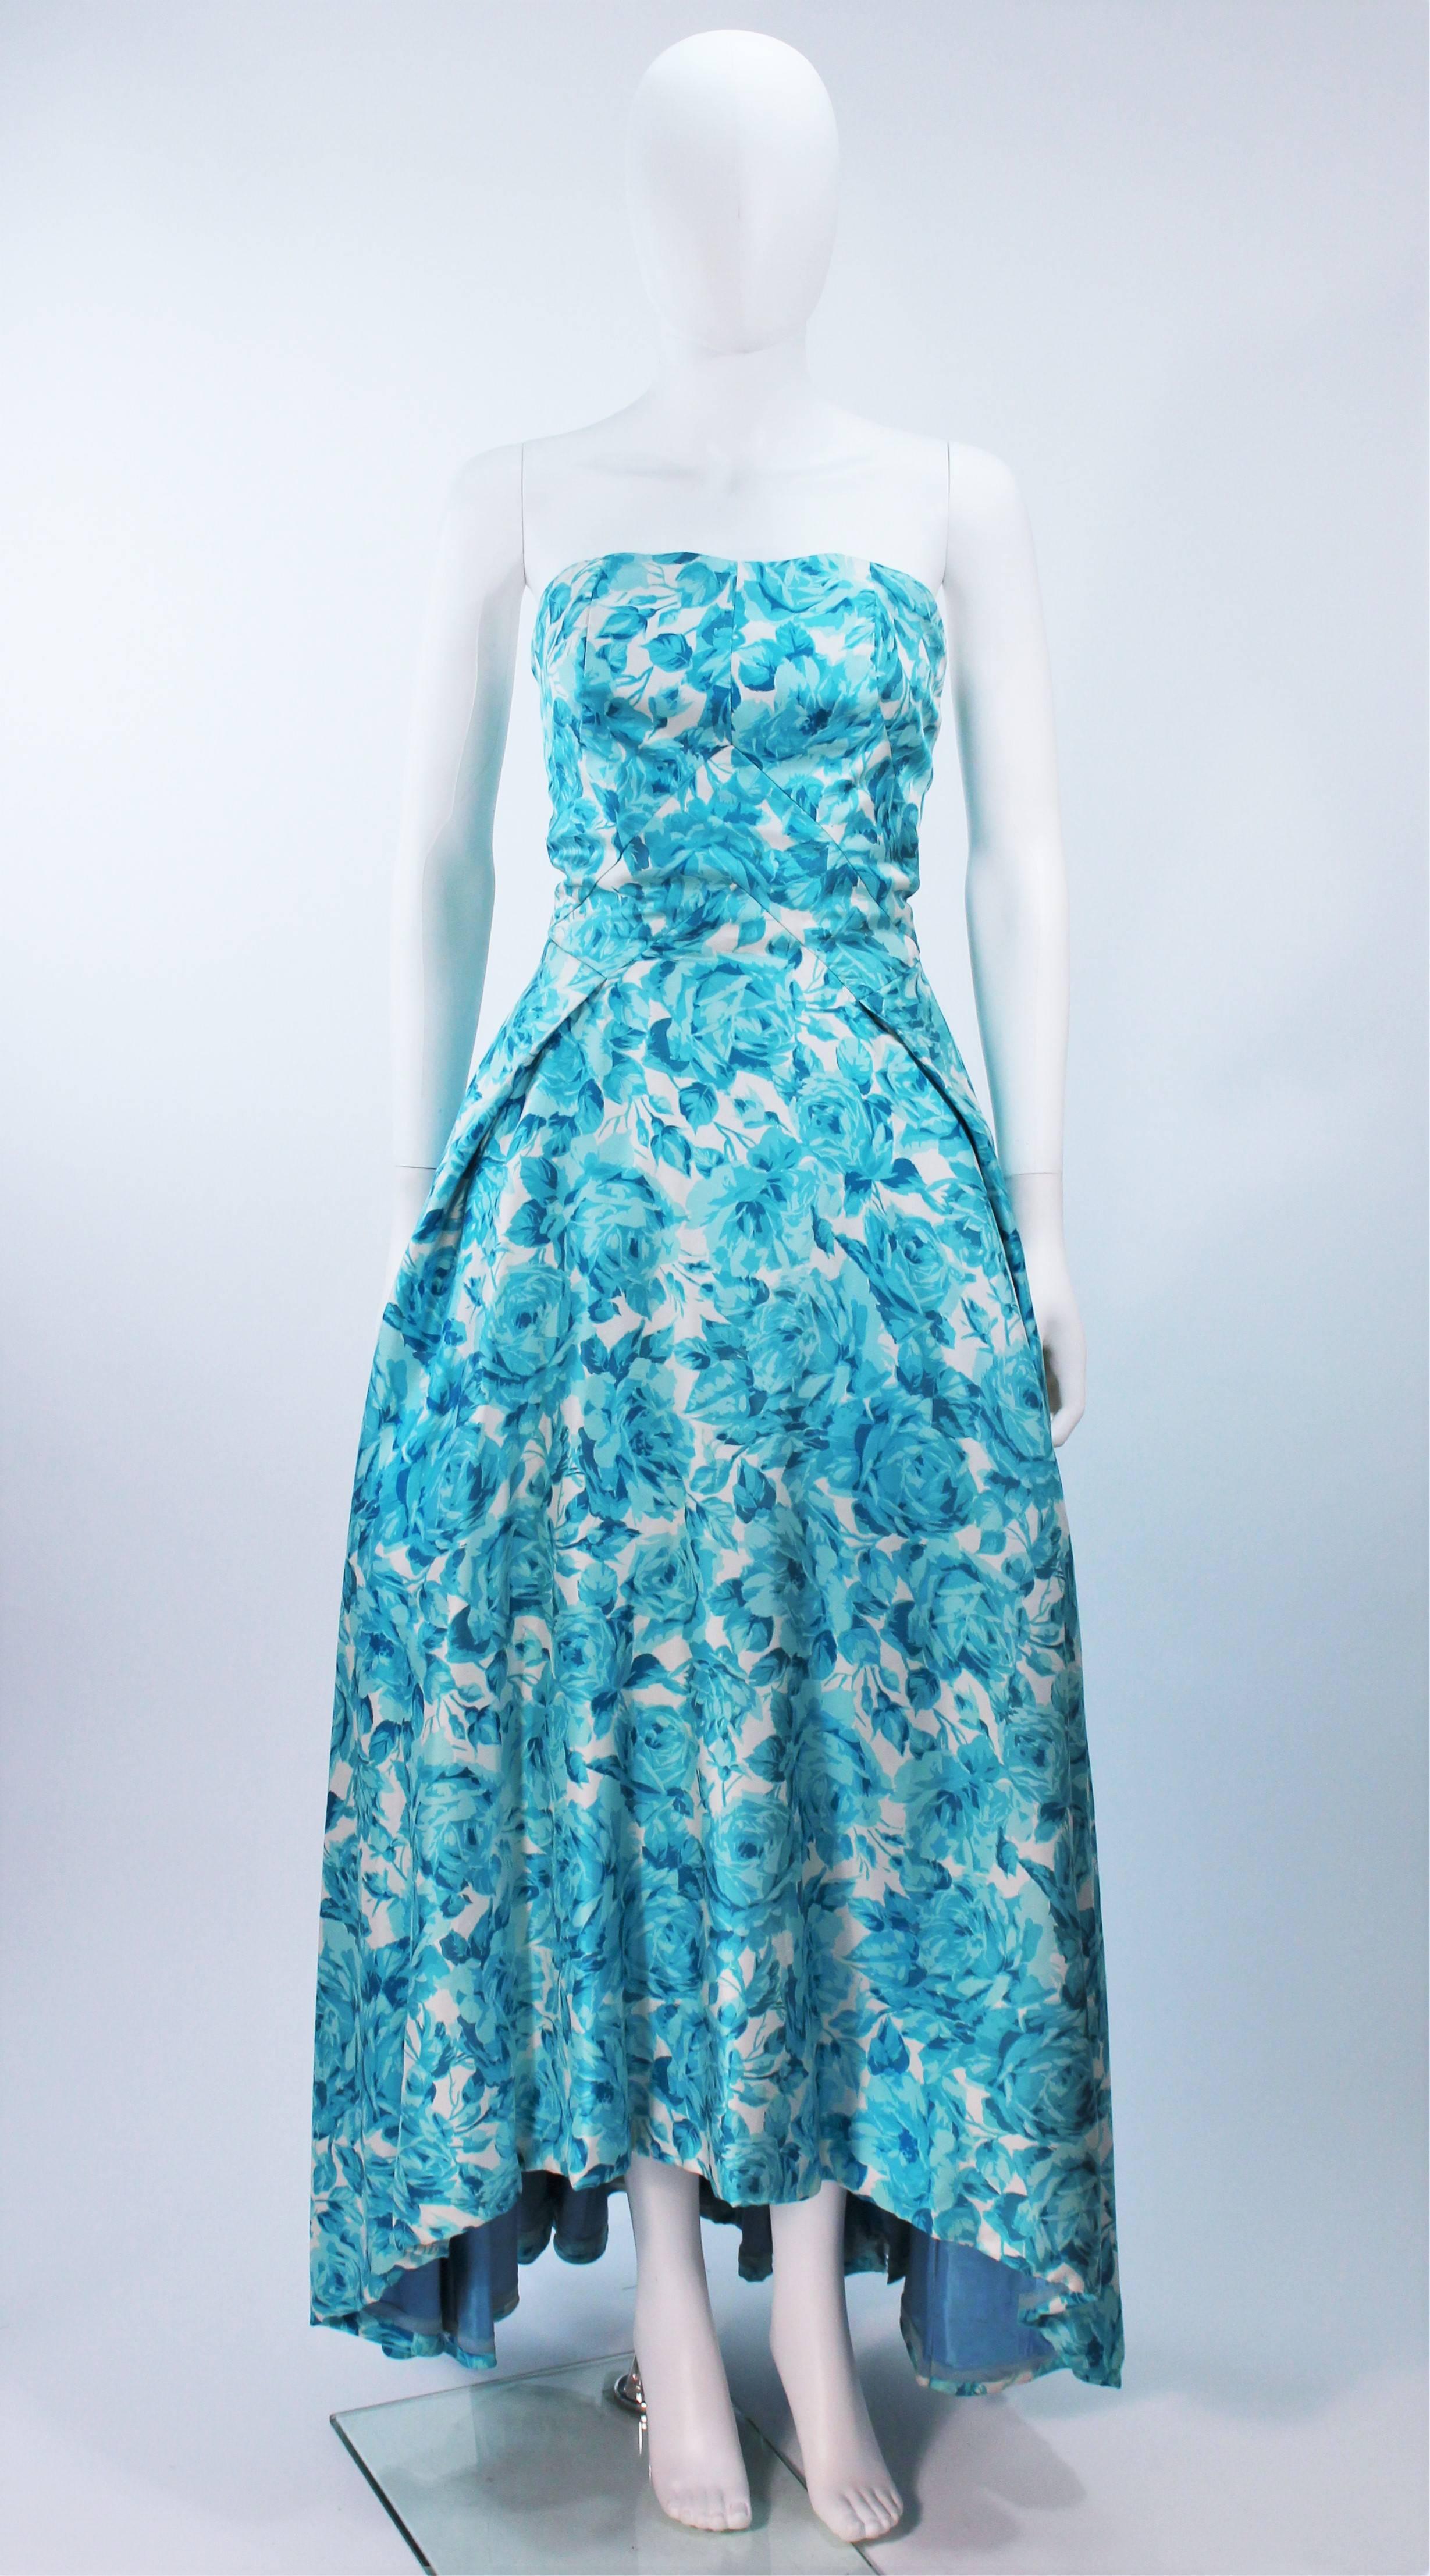  This gown is composed of an aqua and white fabric with a watercolor flower motif. Features a high - low skirt. There is a center back zipper closure. (photographed with crinoline, not included). Beautiful design, in excellent vintage condition.